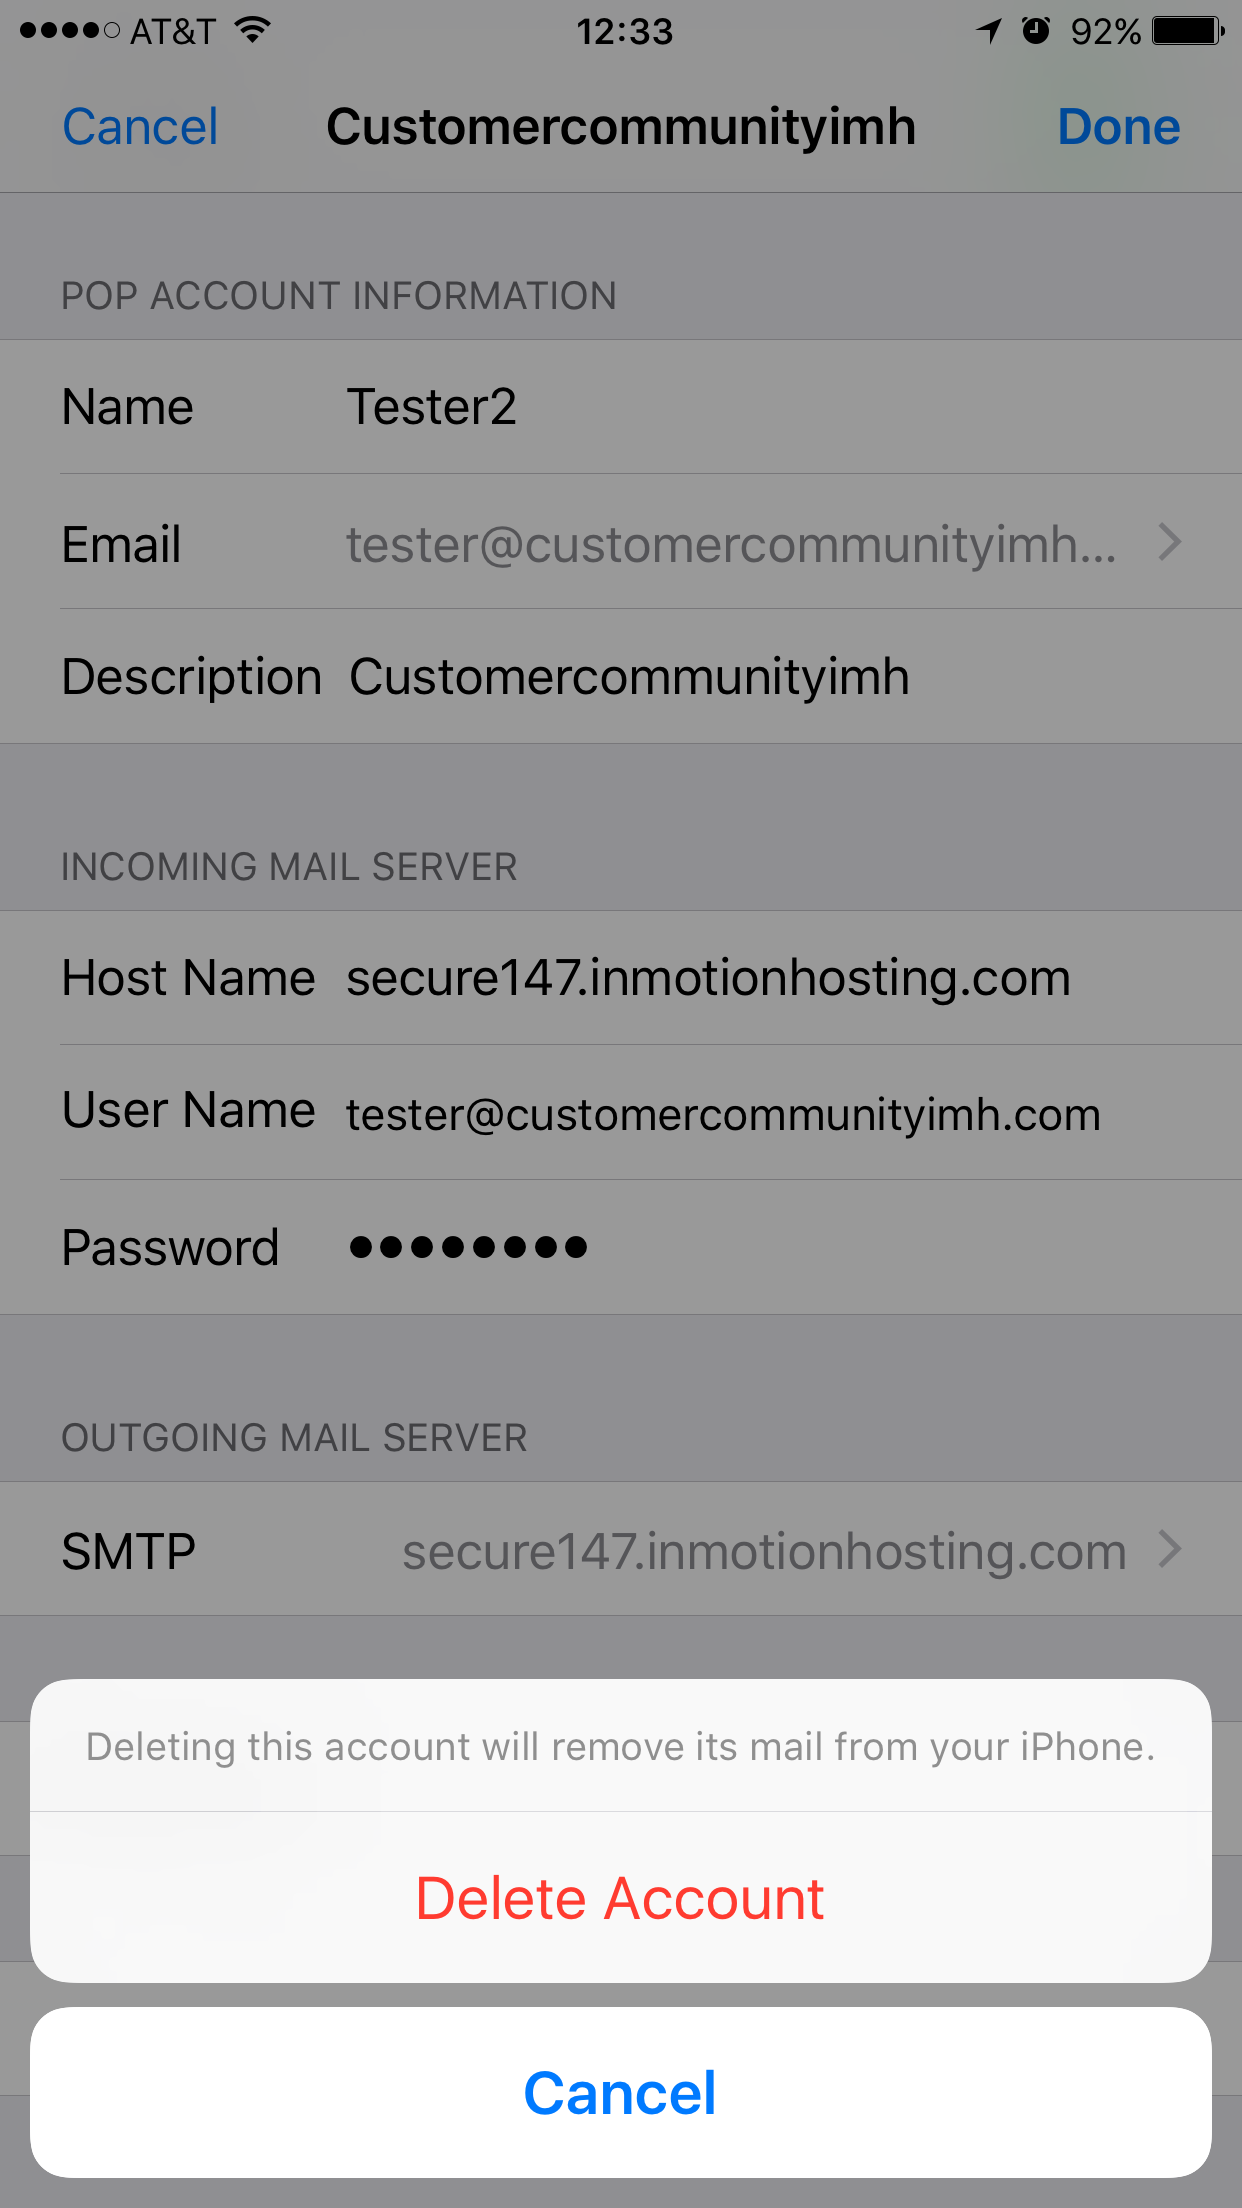 iOS confirmation dialogue for deleting an account from Mail Settings on an iPhone